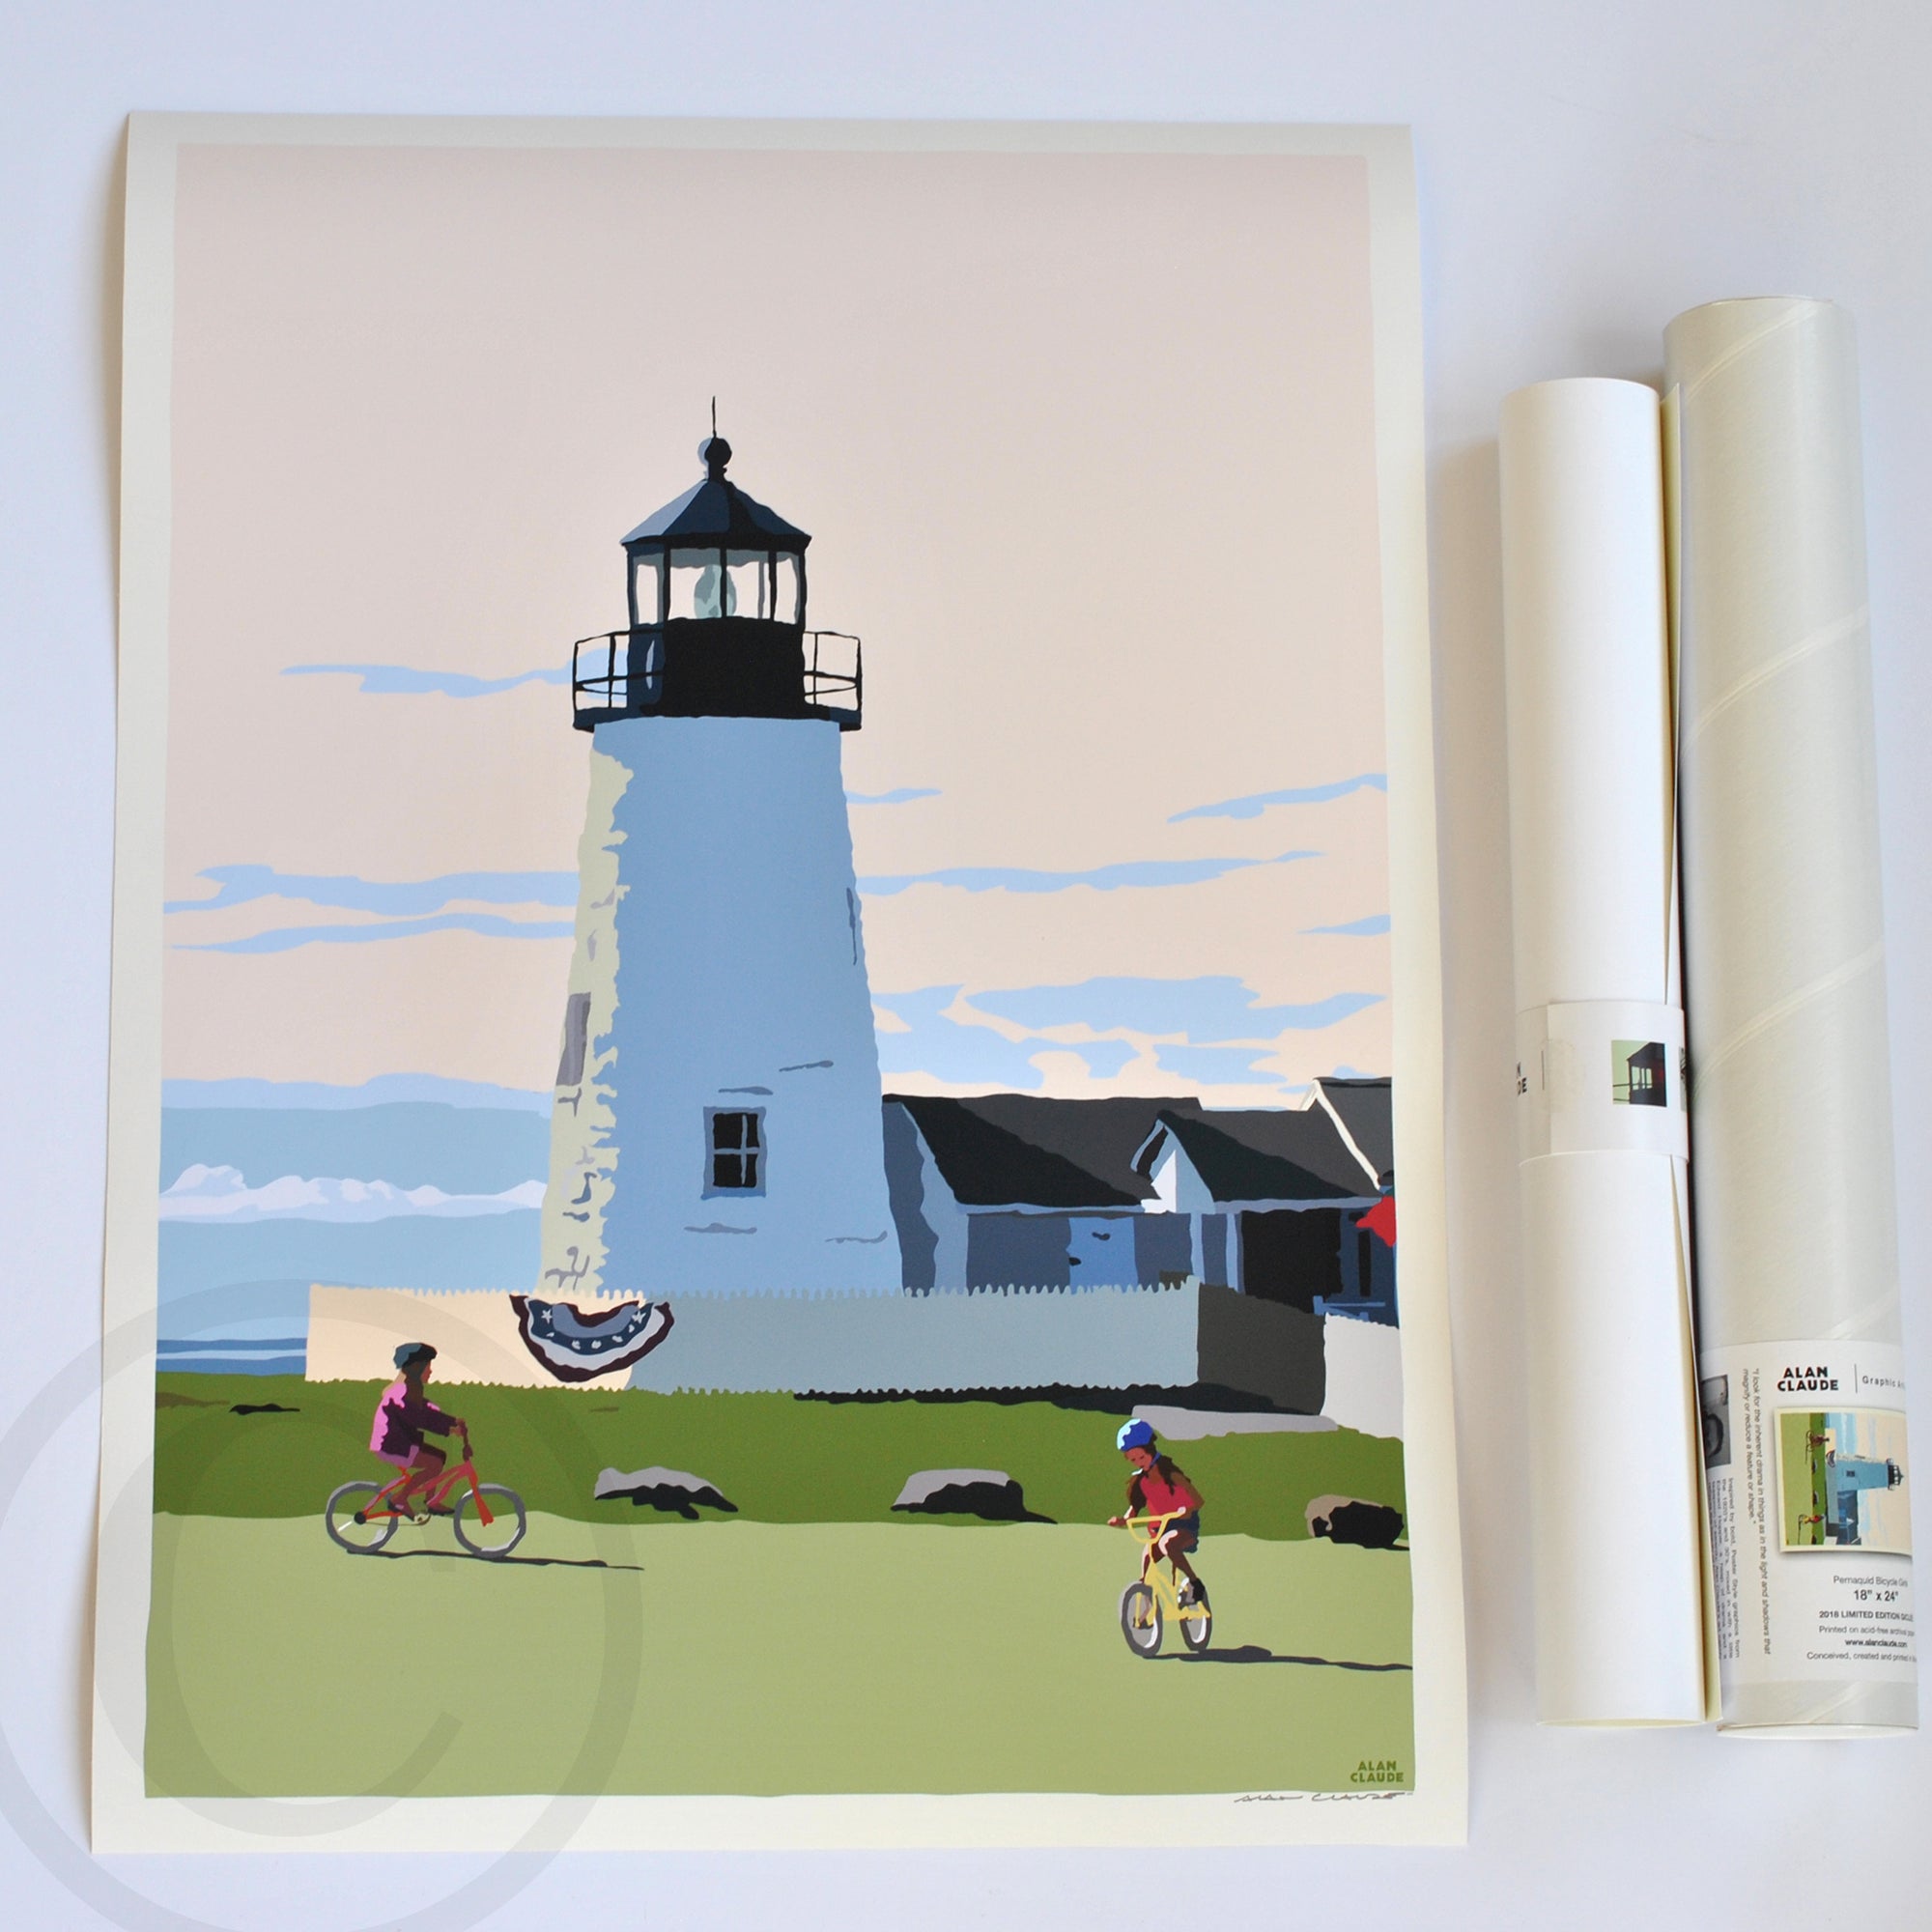 Pemaquid Bicycle Girls Art Print 18" x 24" Wall Poster By Alan Claude - Maine